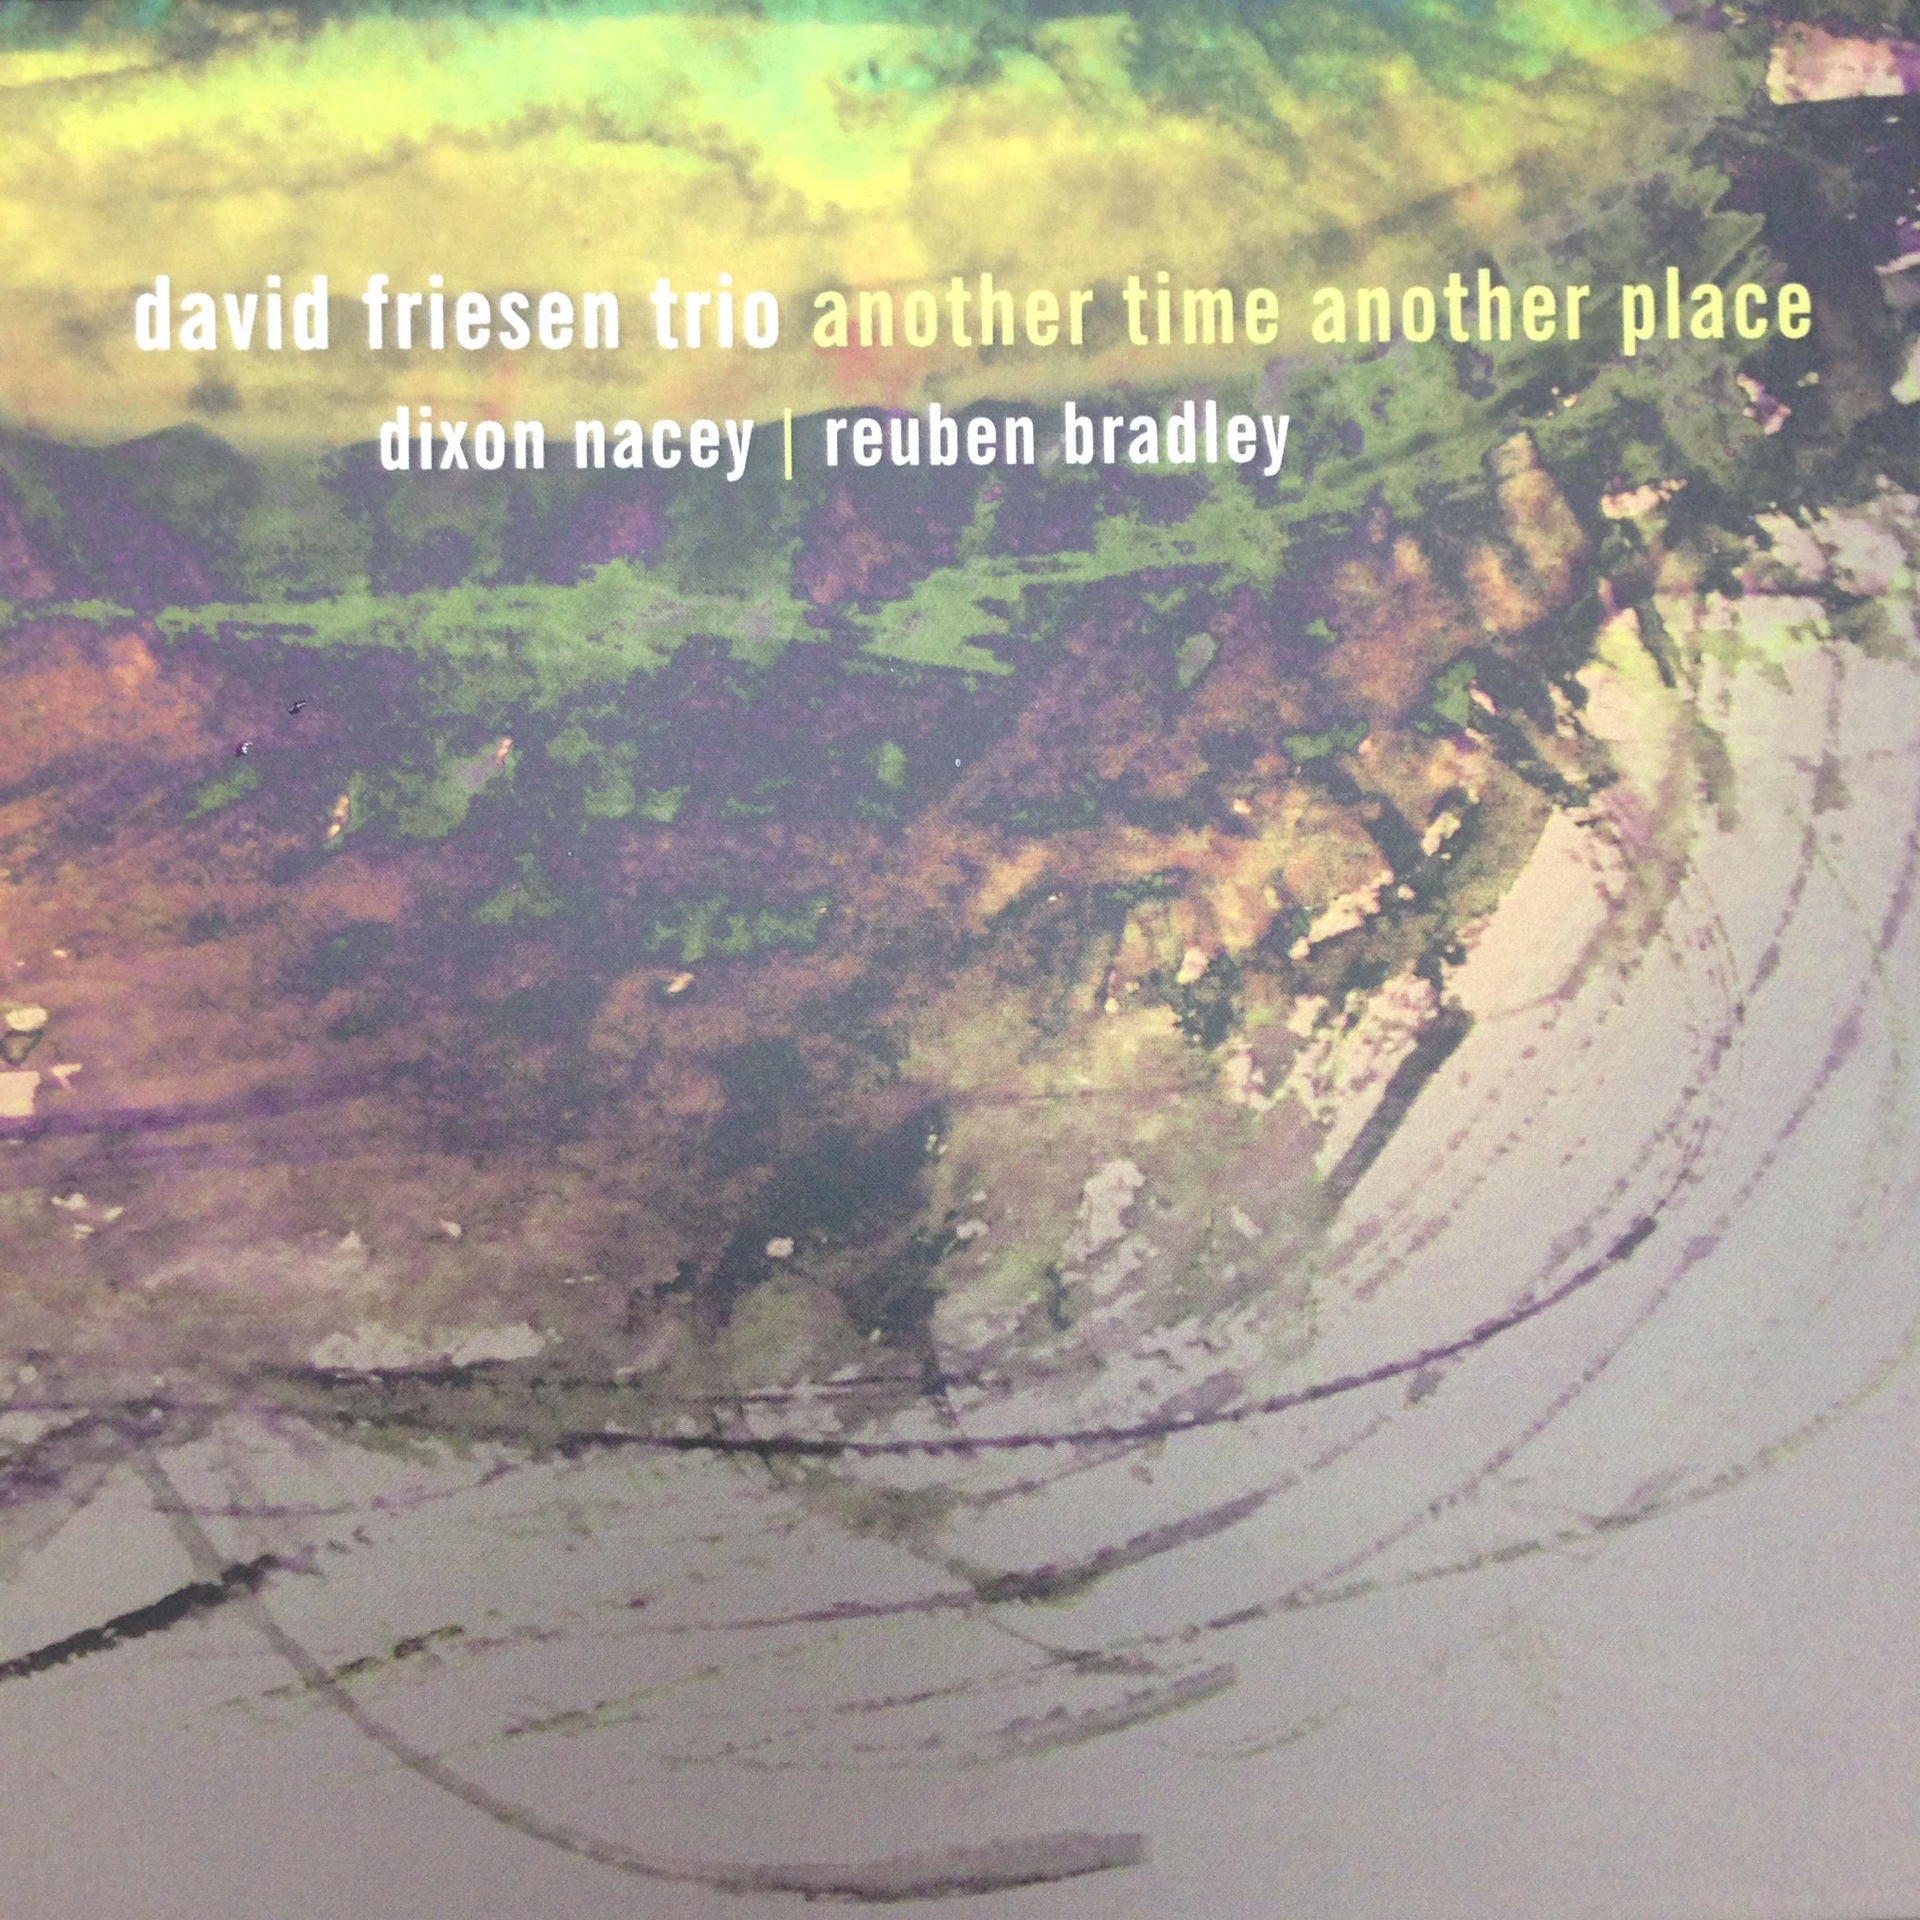 FRIESEN DAVID TRIO-ANOTHER TIME ANOTHER PLACE CD *NEW*